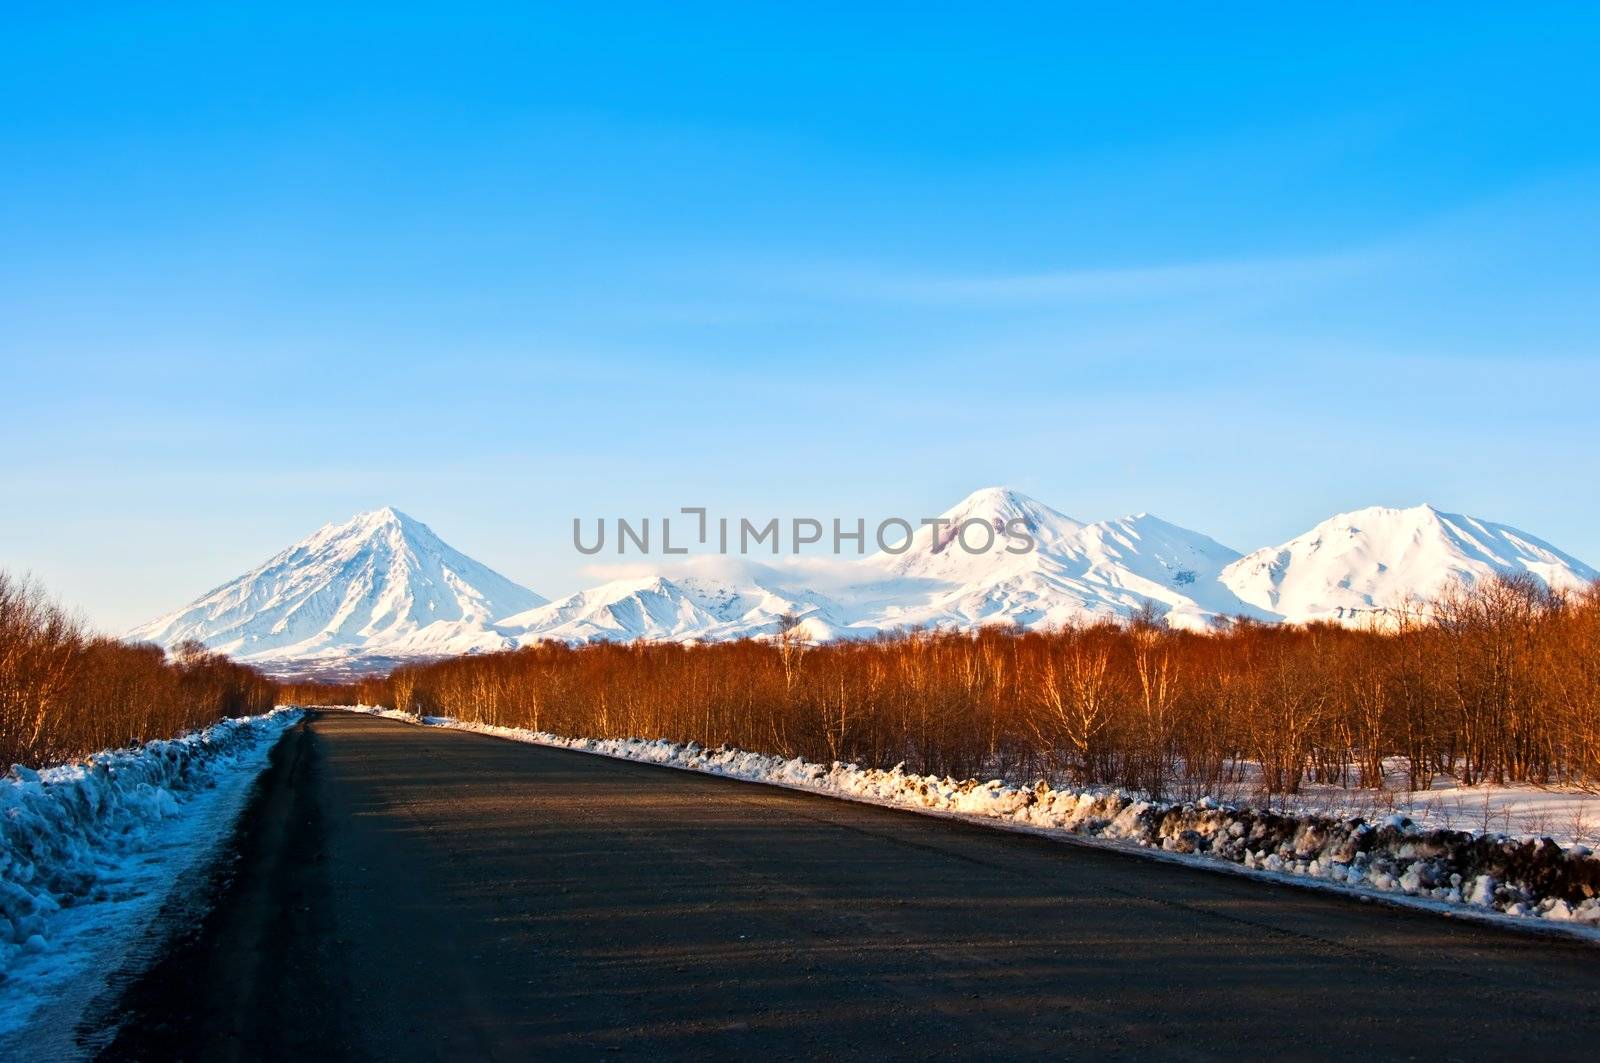 snow road to winter wood on kamchatka